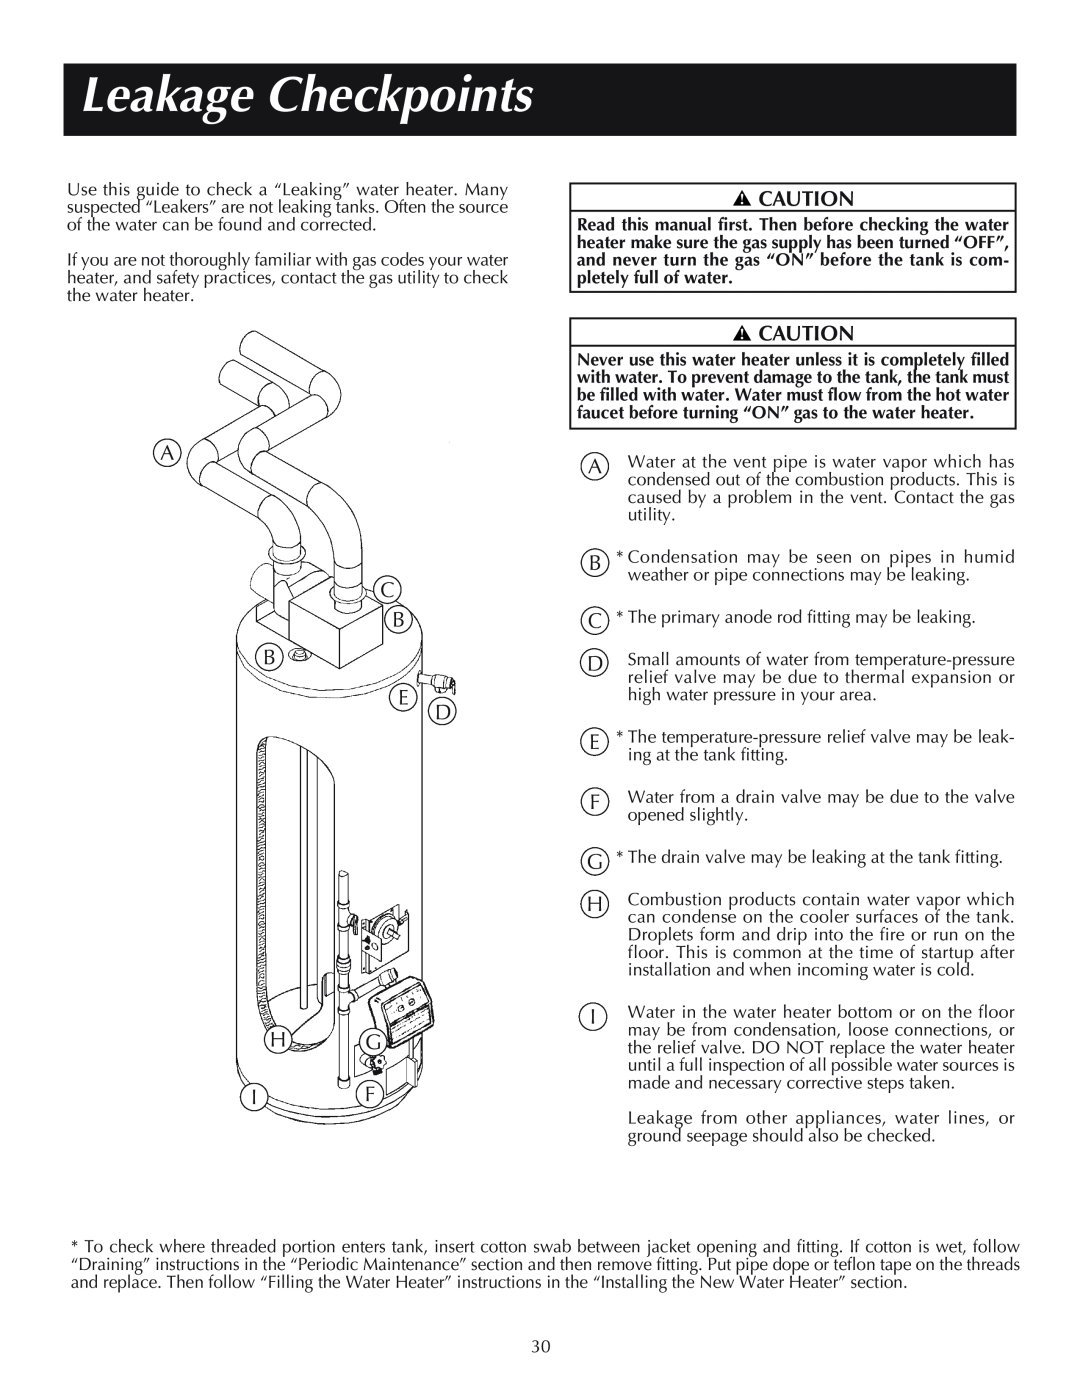 Reliance Water Heaters 606, 11-03, 184333-001 instruction manual Leakage Checkpoints, A C B B E Hg If 